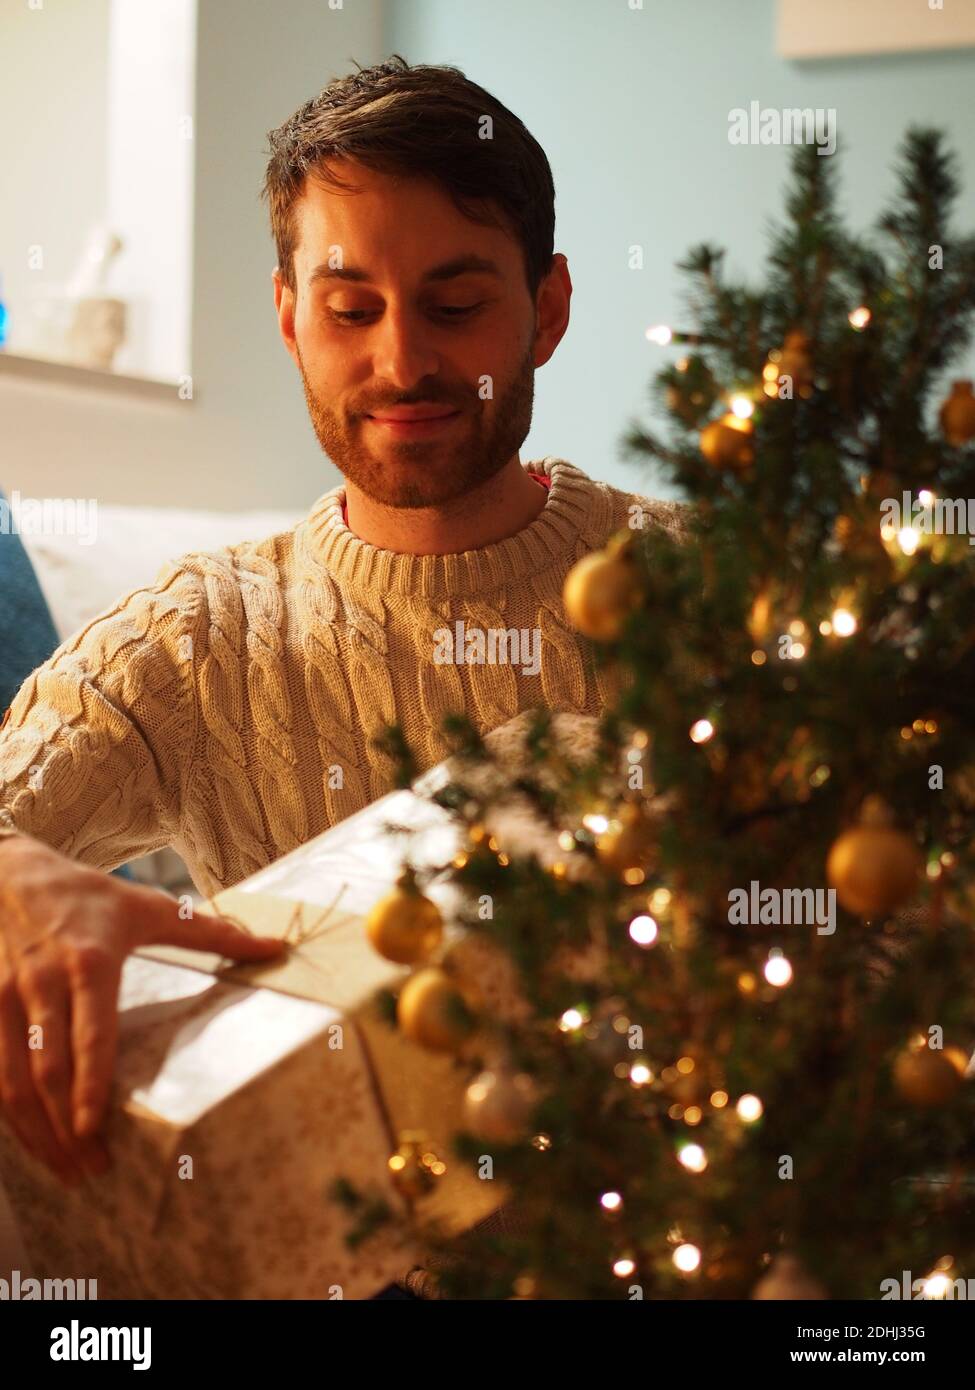 Caucasian young man next to a Christmas tree in a woollen sweater holding a present in his hands. He enjoy the holidays in a cozy home. Stock Photo